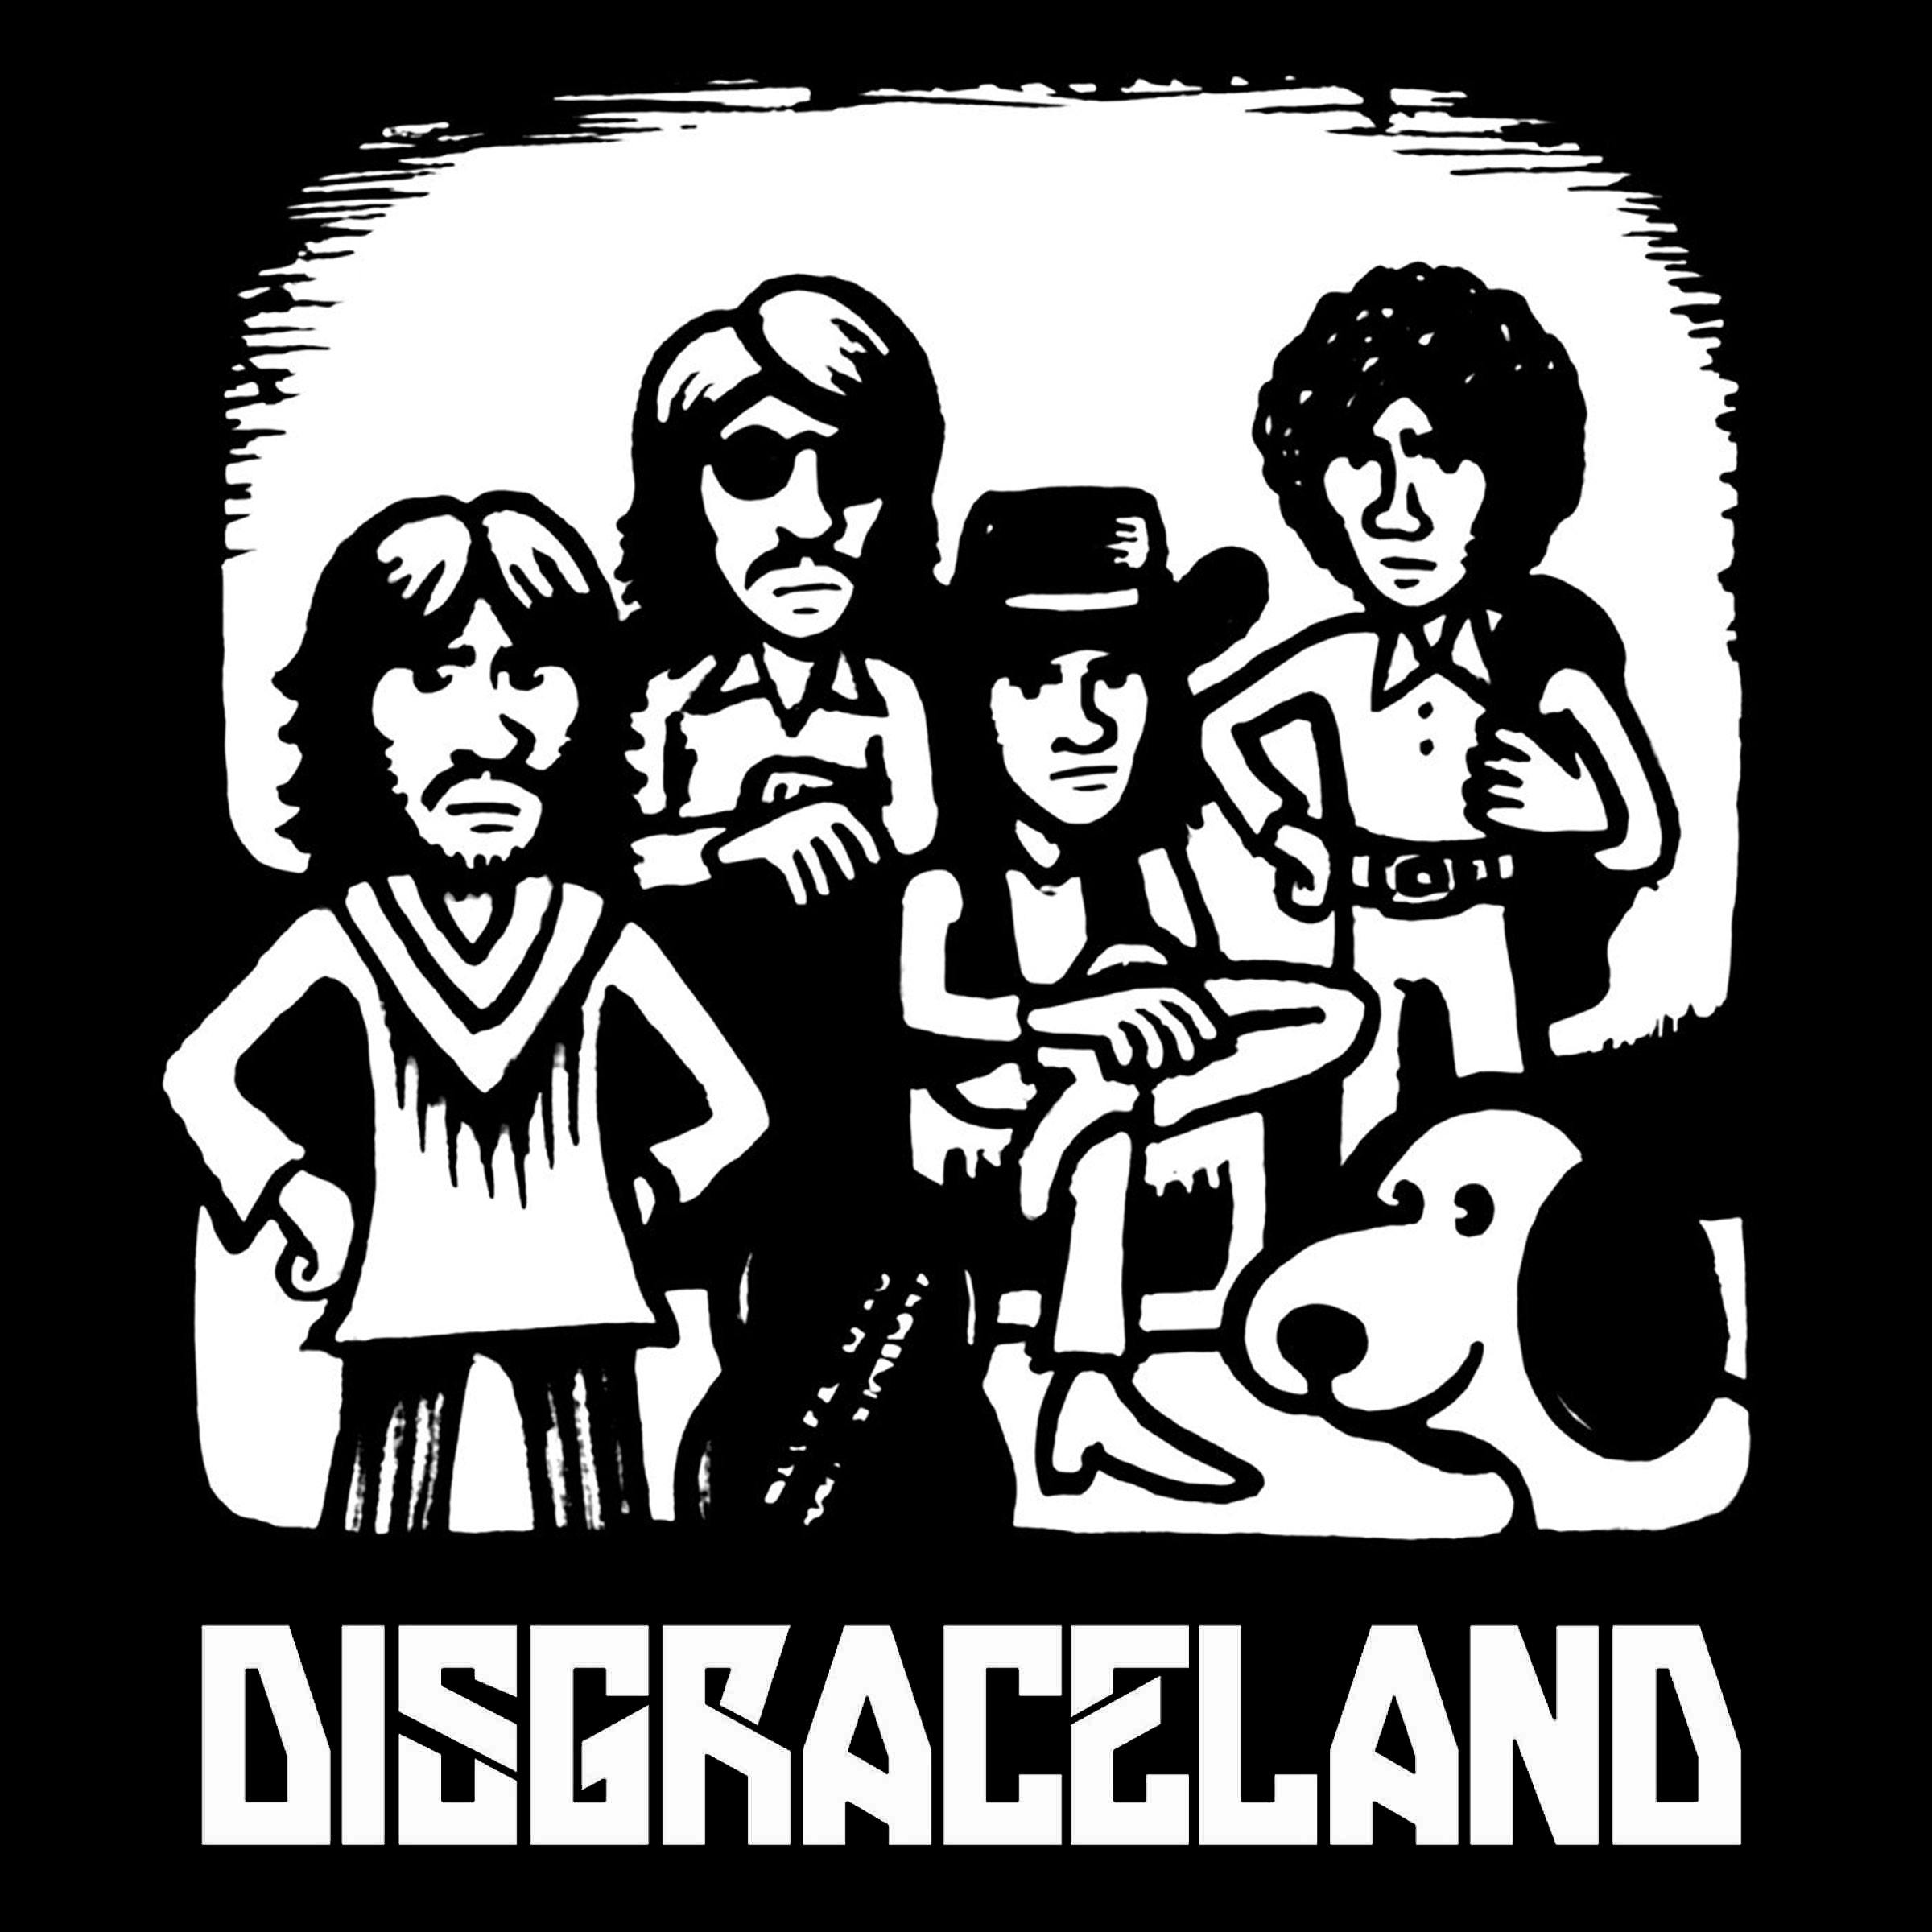 Presenting Disgraceland - Derek and the Dominos: Clapton, Cocaine, Motorcycles, and Murder